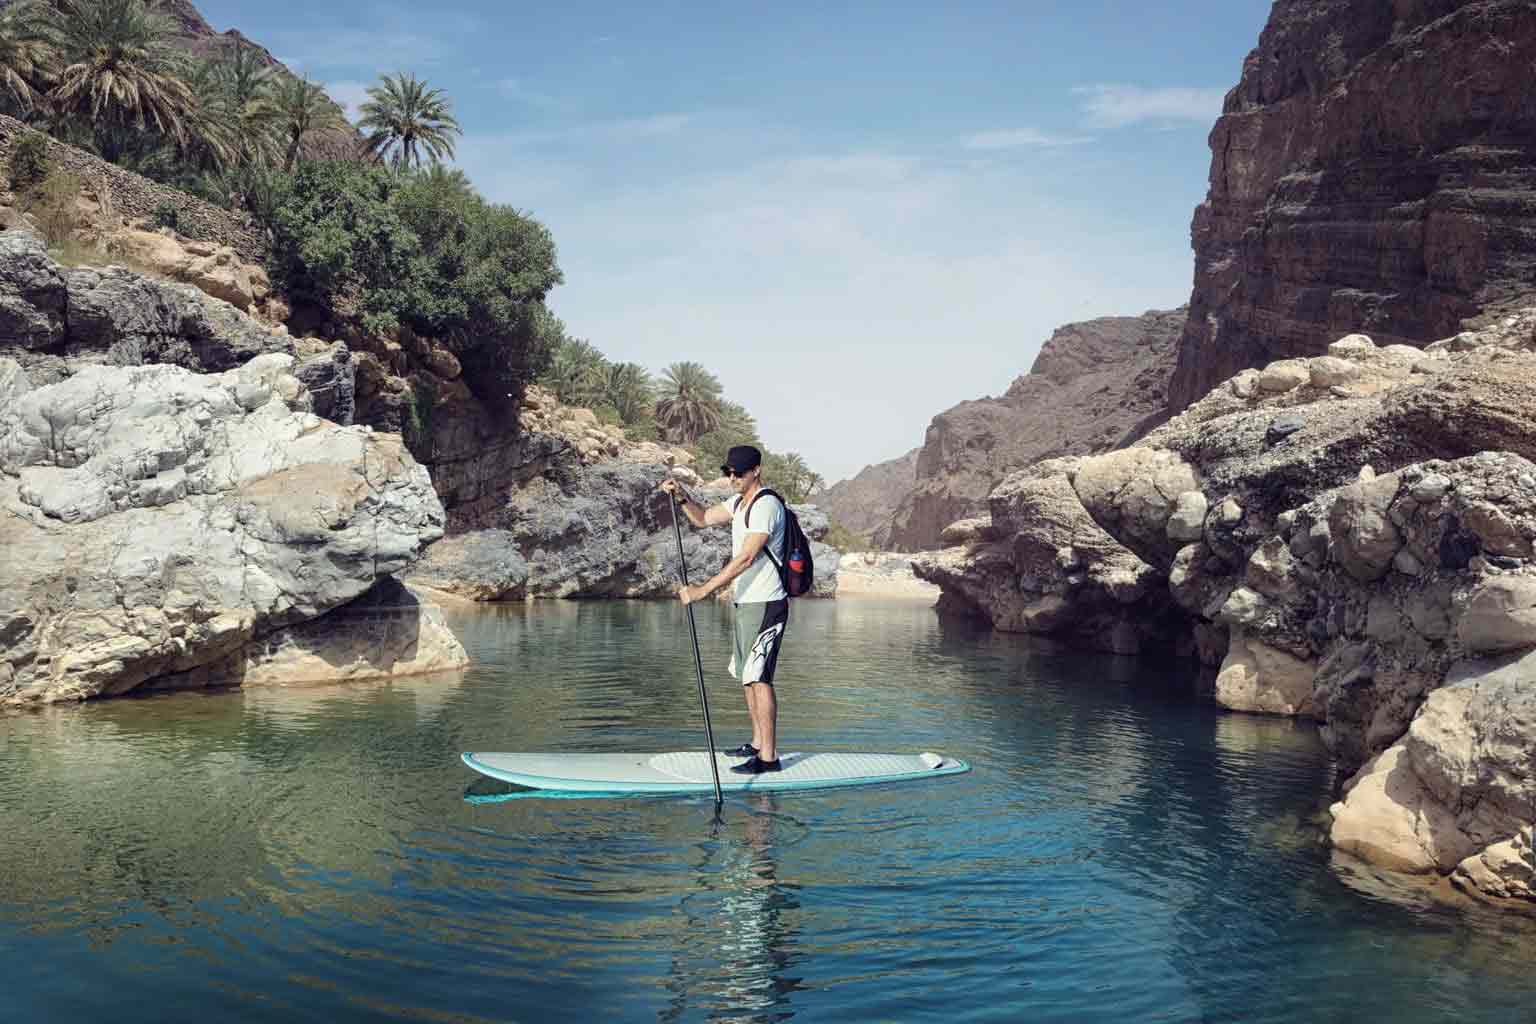 Stand up paddle Boarding Oman2